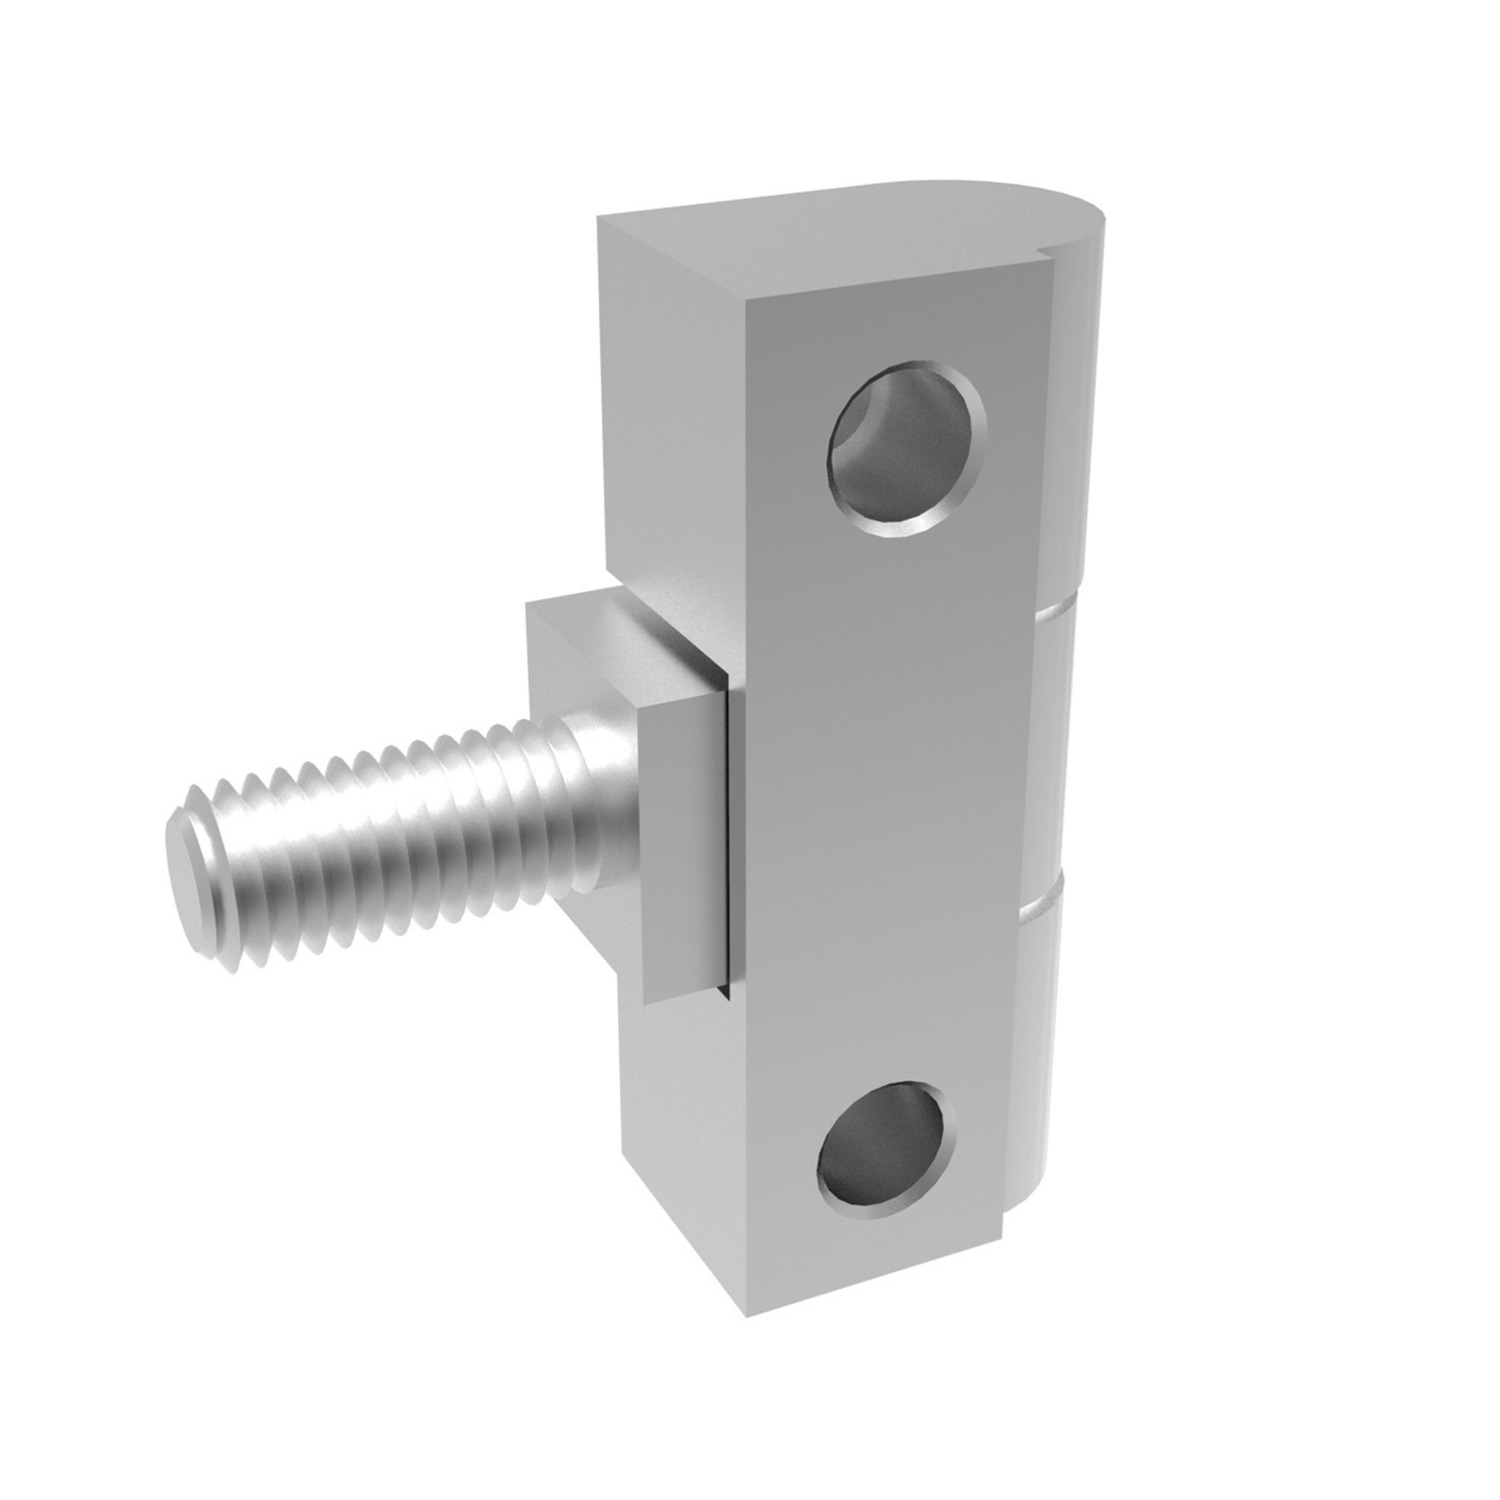 S1174.AW0020 Surface Mount Hinge intergrated stud & screw mount